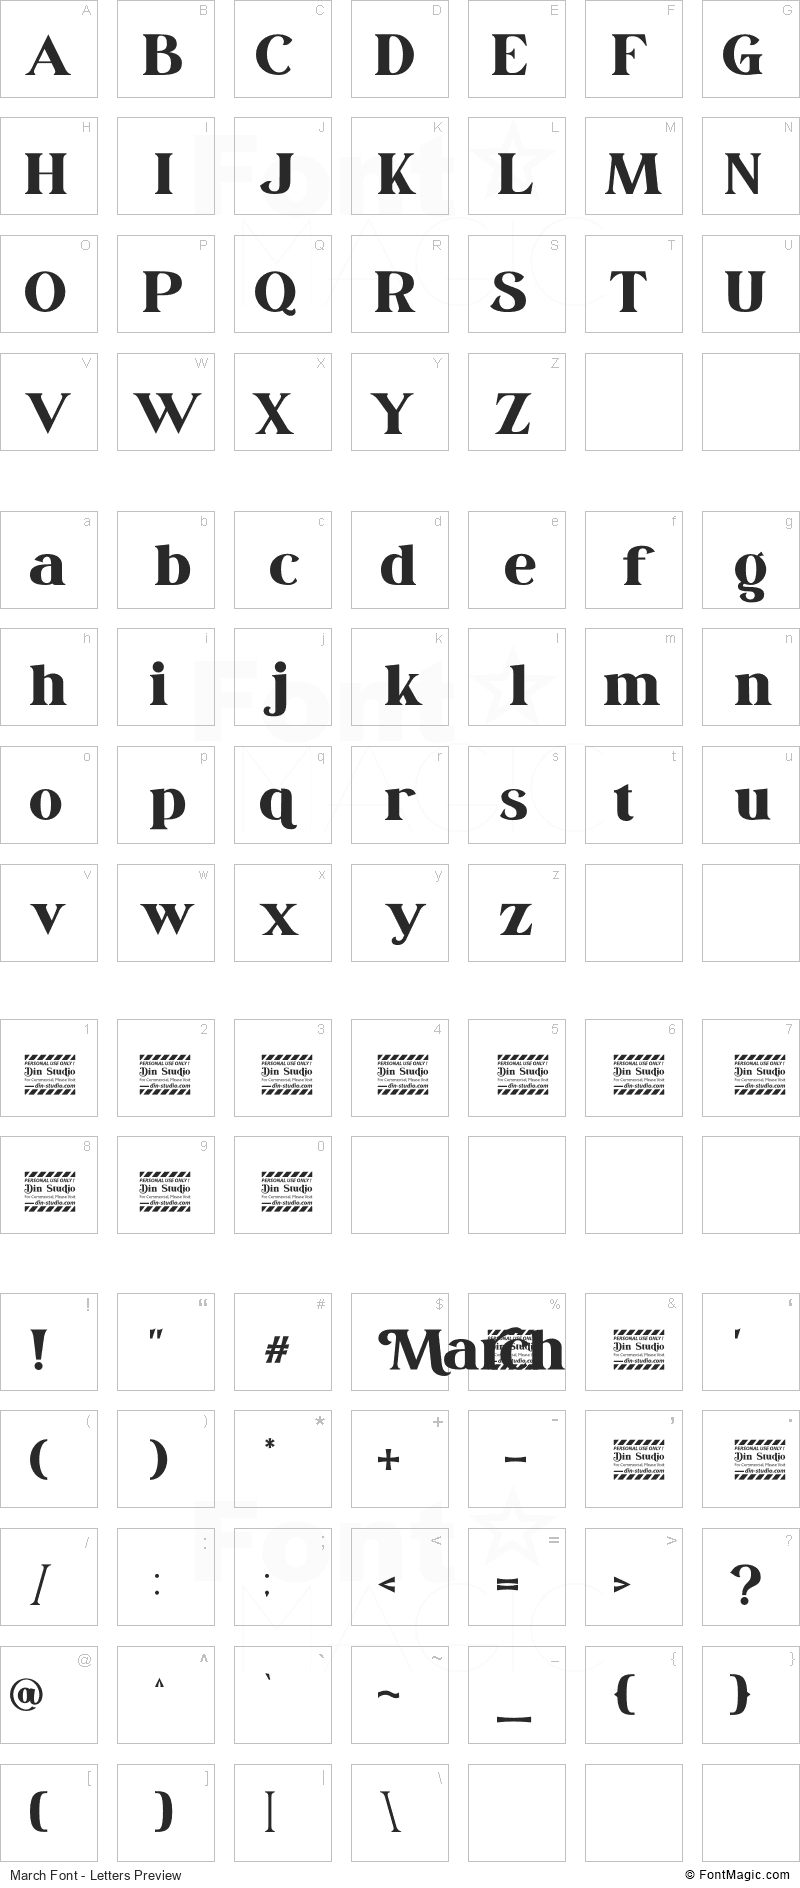 March Font - All Latters Preview Chart